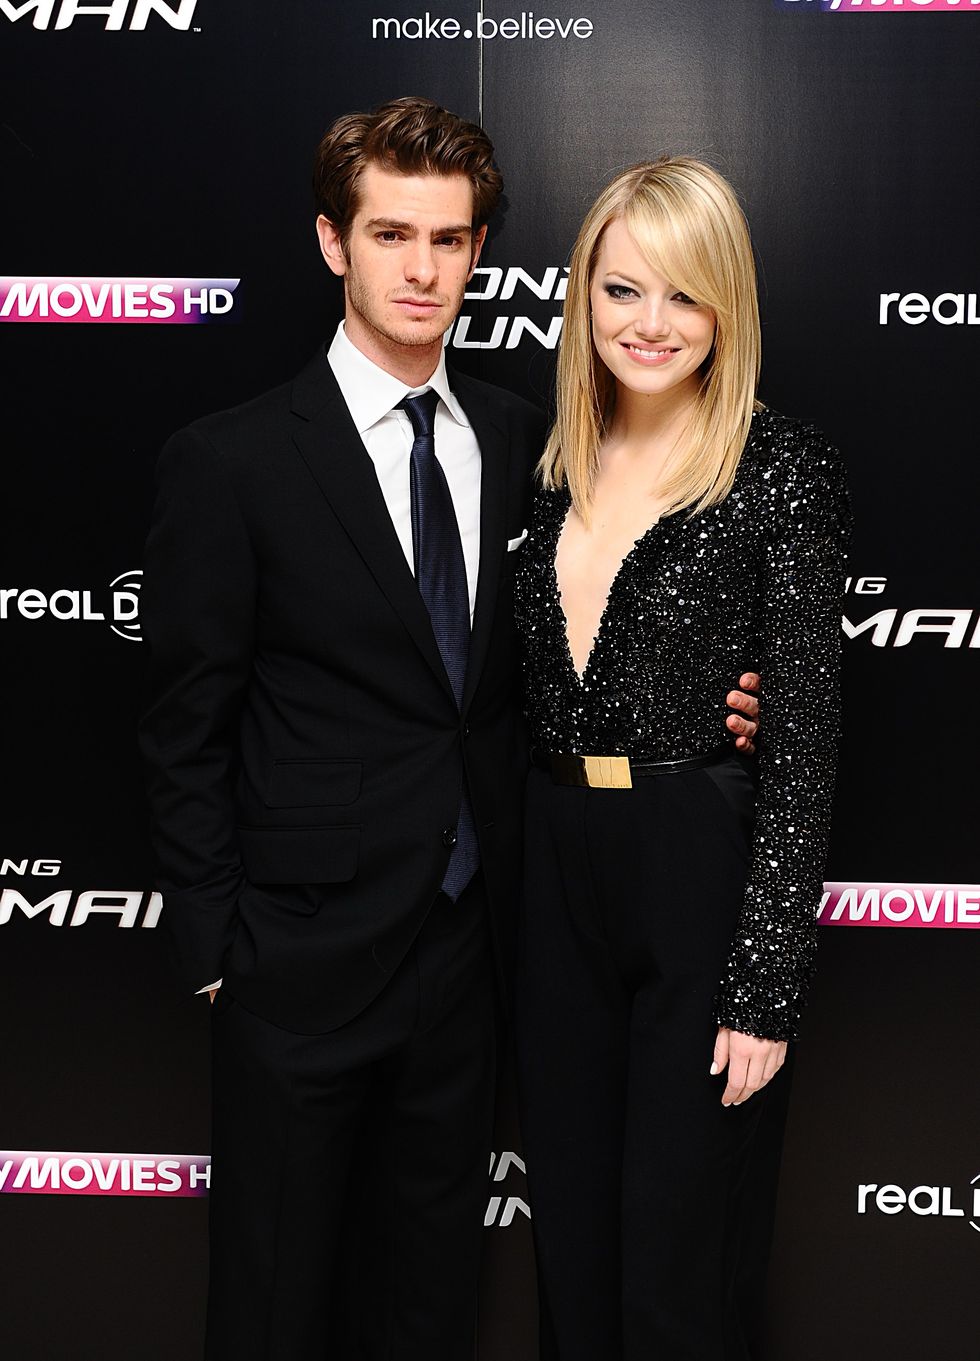 Emma Stone and Andrew Garfield Use The Paparazzi to Promote